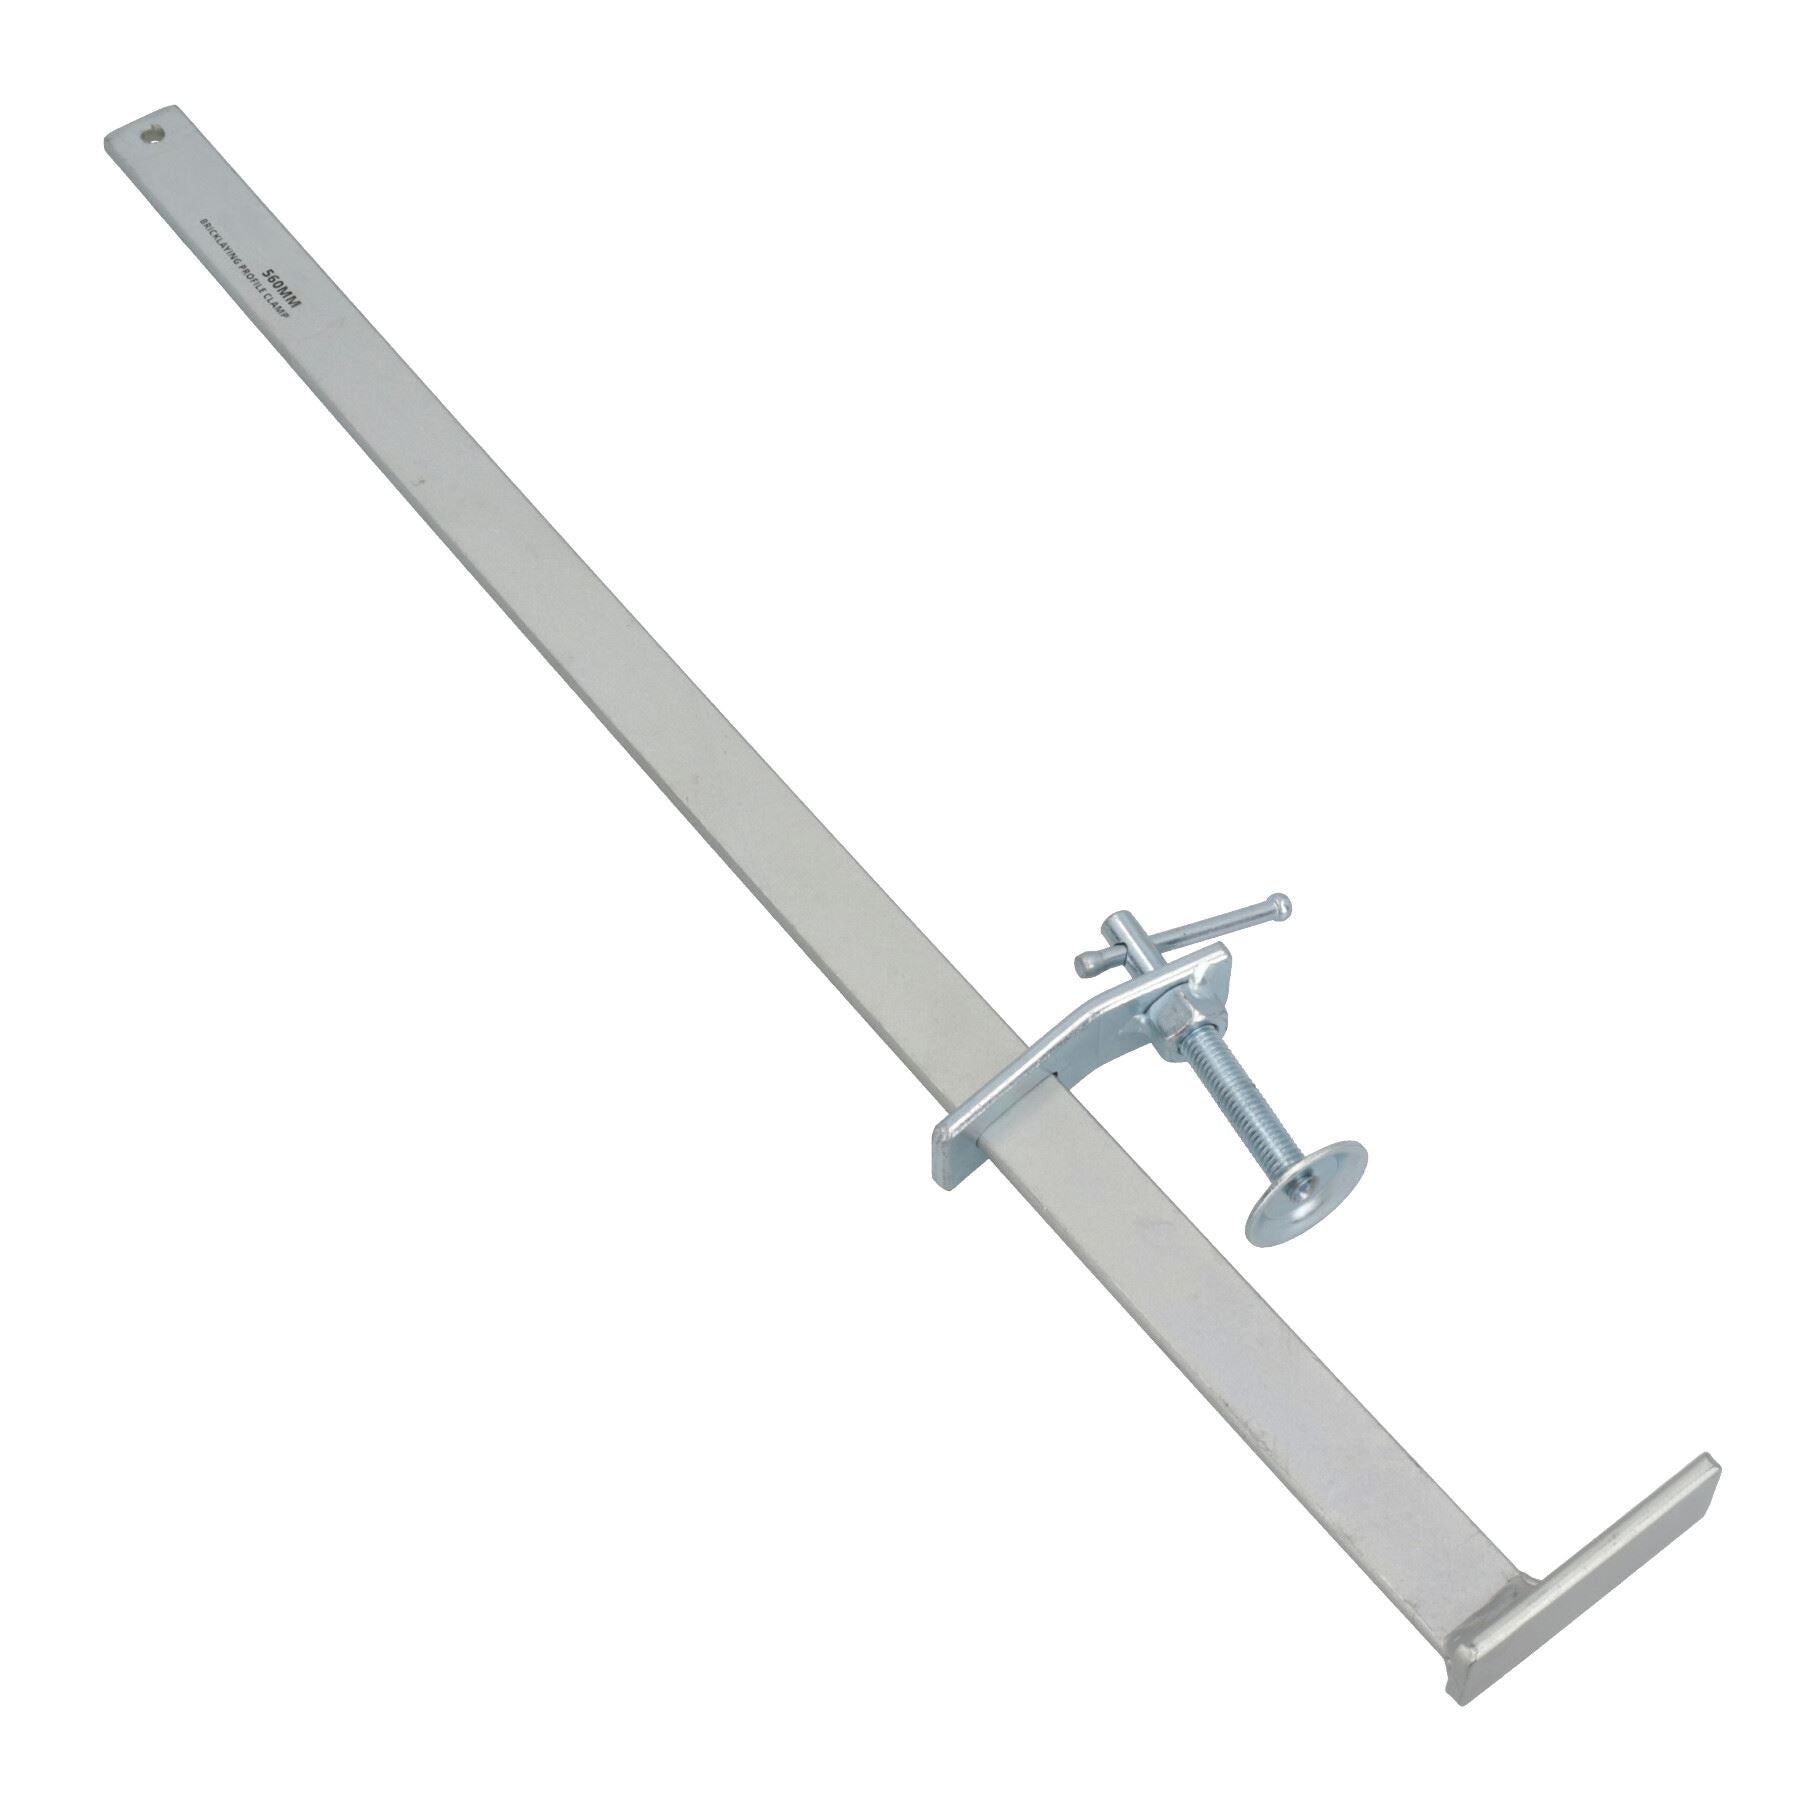 560mm Brick Laying Sliding Profile Clamp Holder Fastener Corner Wall Clamps